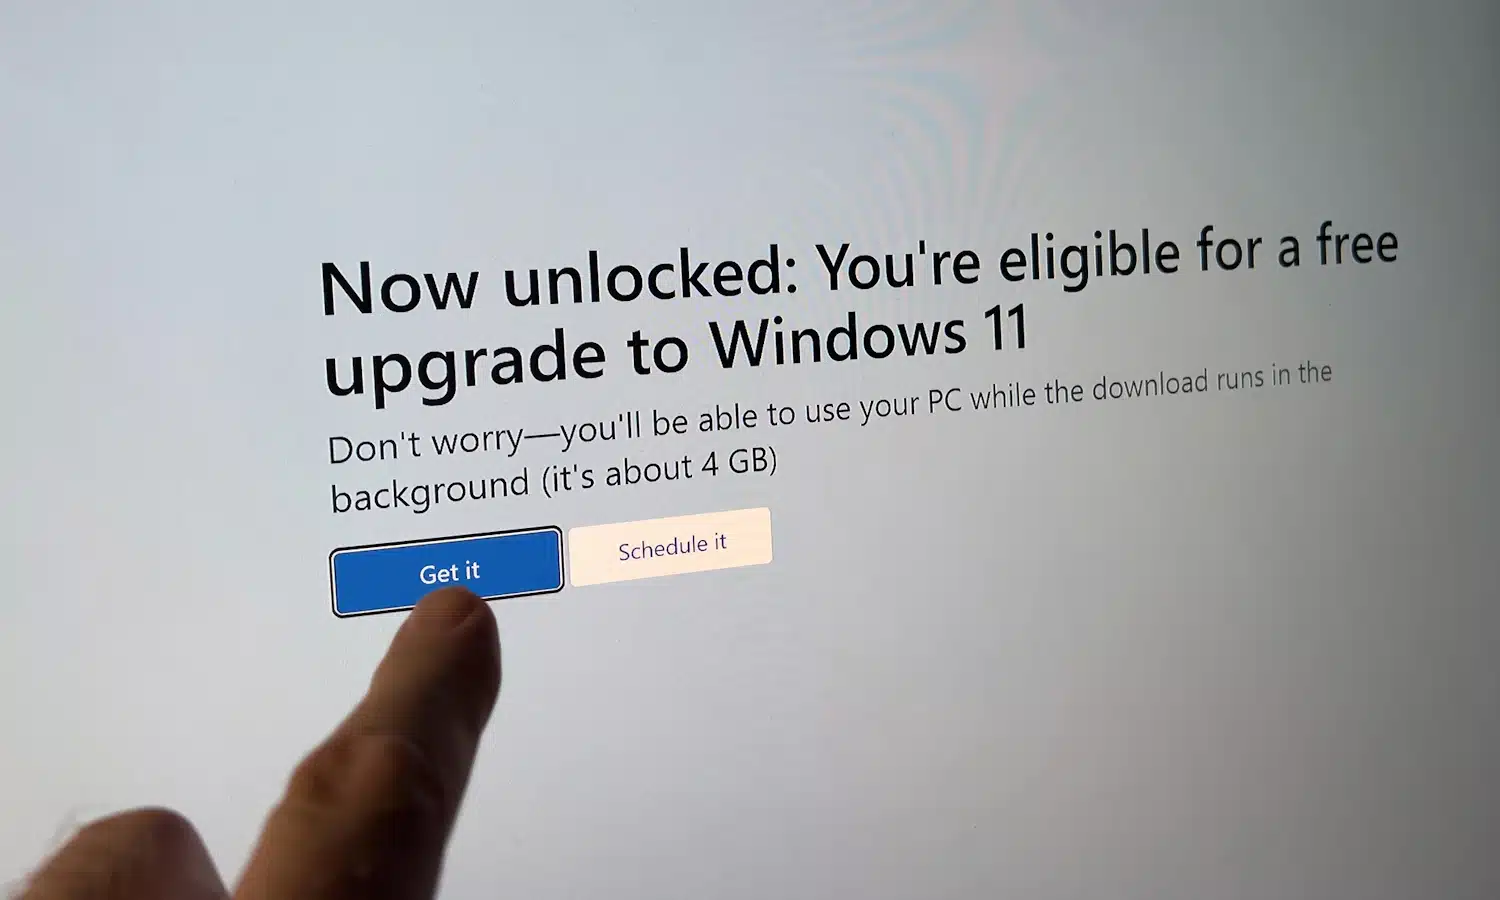 Microsoft ends free upgrades from Windows 7 and 8 to Windows 11